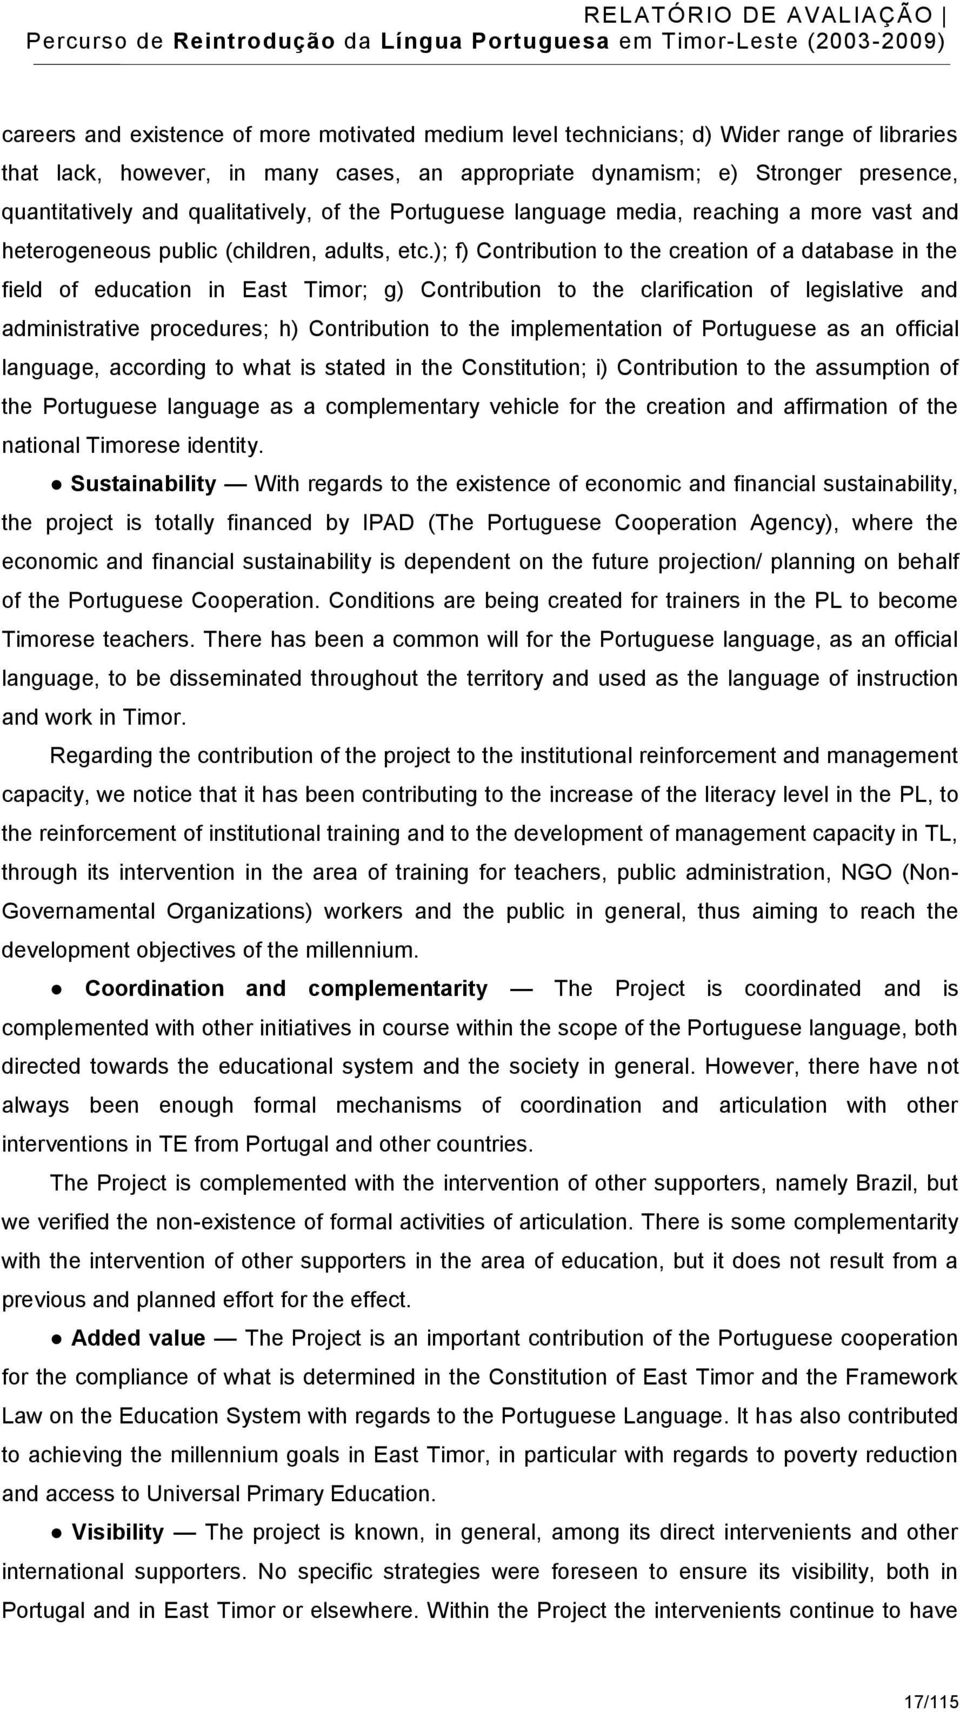 ); f) Contribution to the creation of a database in the field of education in East Timor; g) Contribution to the clarification of legislative and administrative procedures; h) Contribution to the